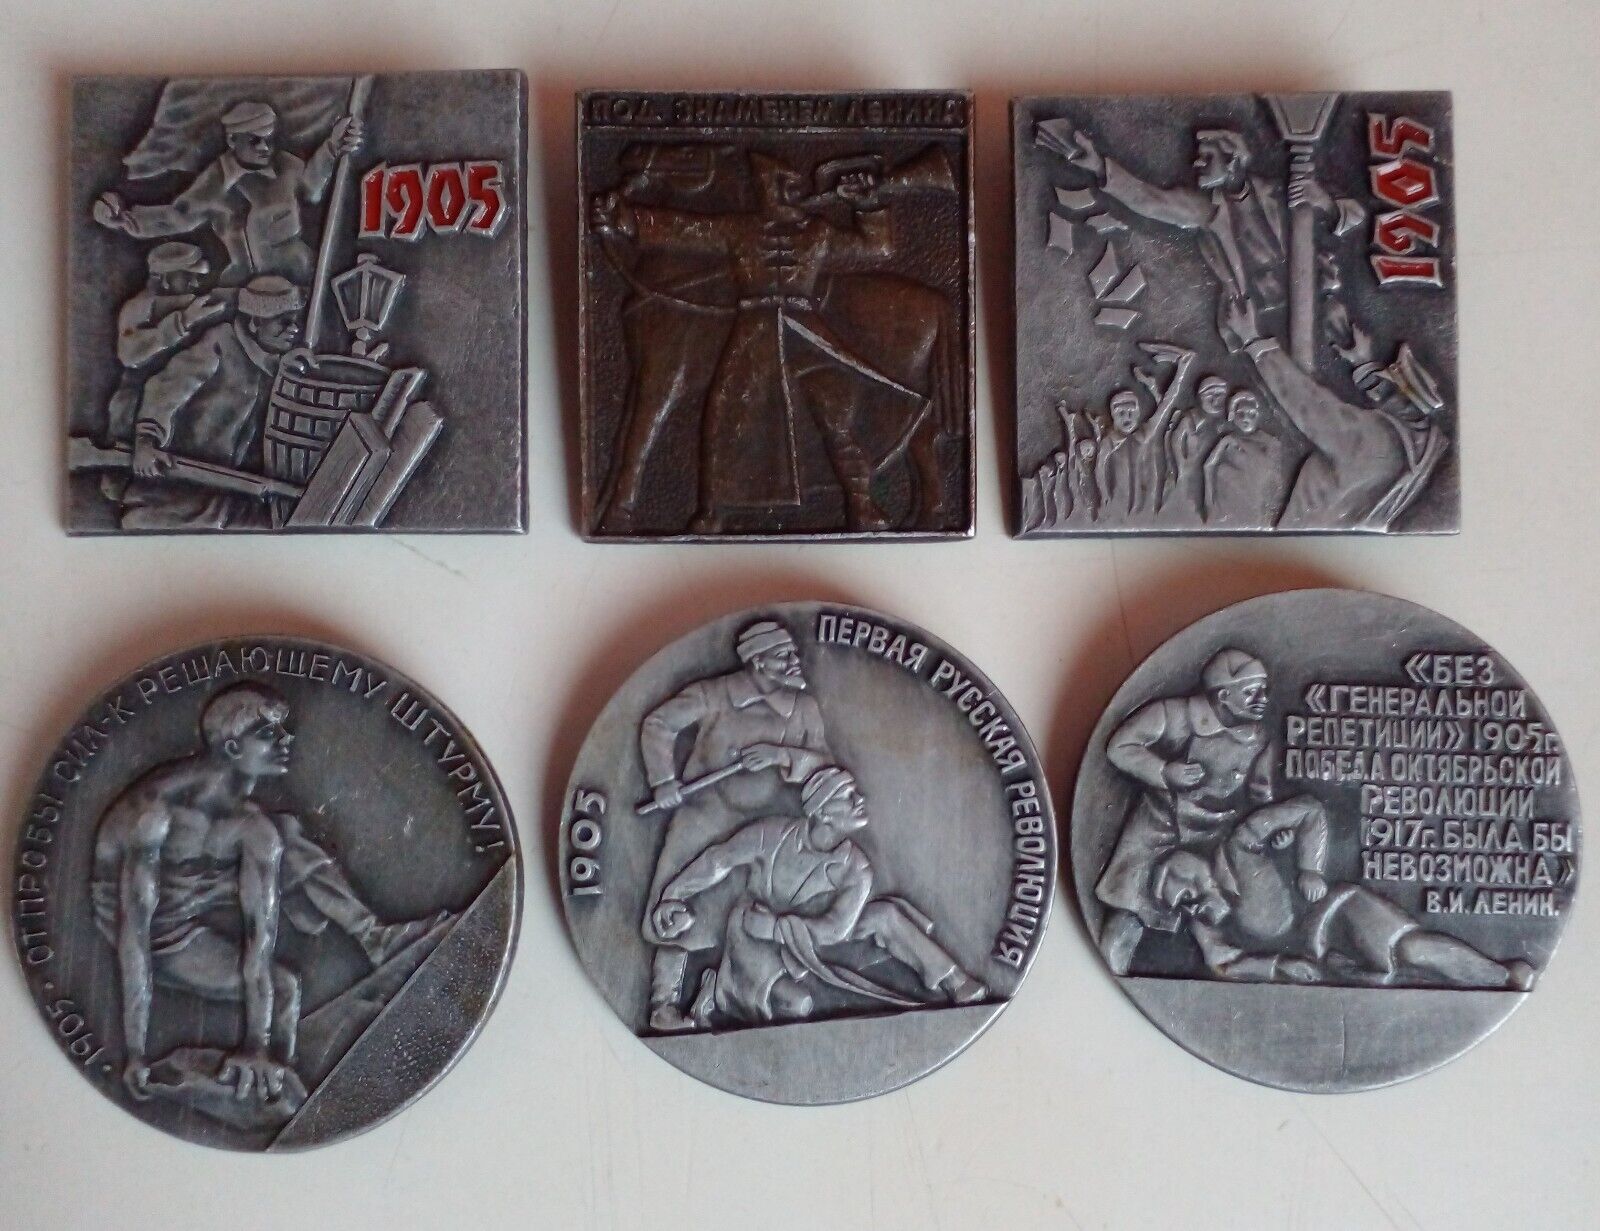 Badges 1905 First Russian Revolution (set of 6 pieces)